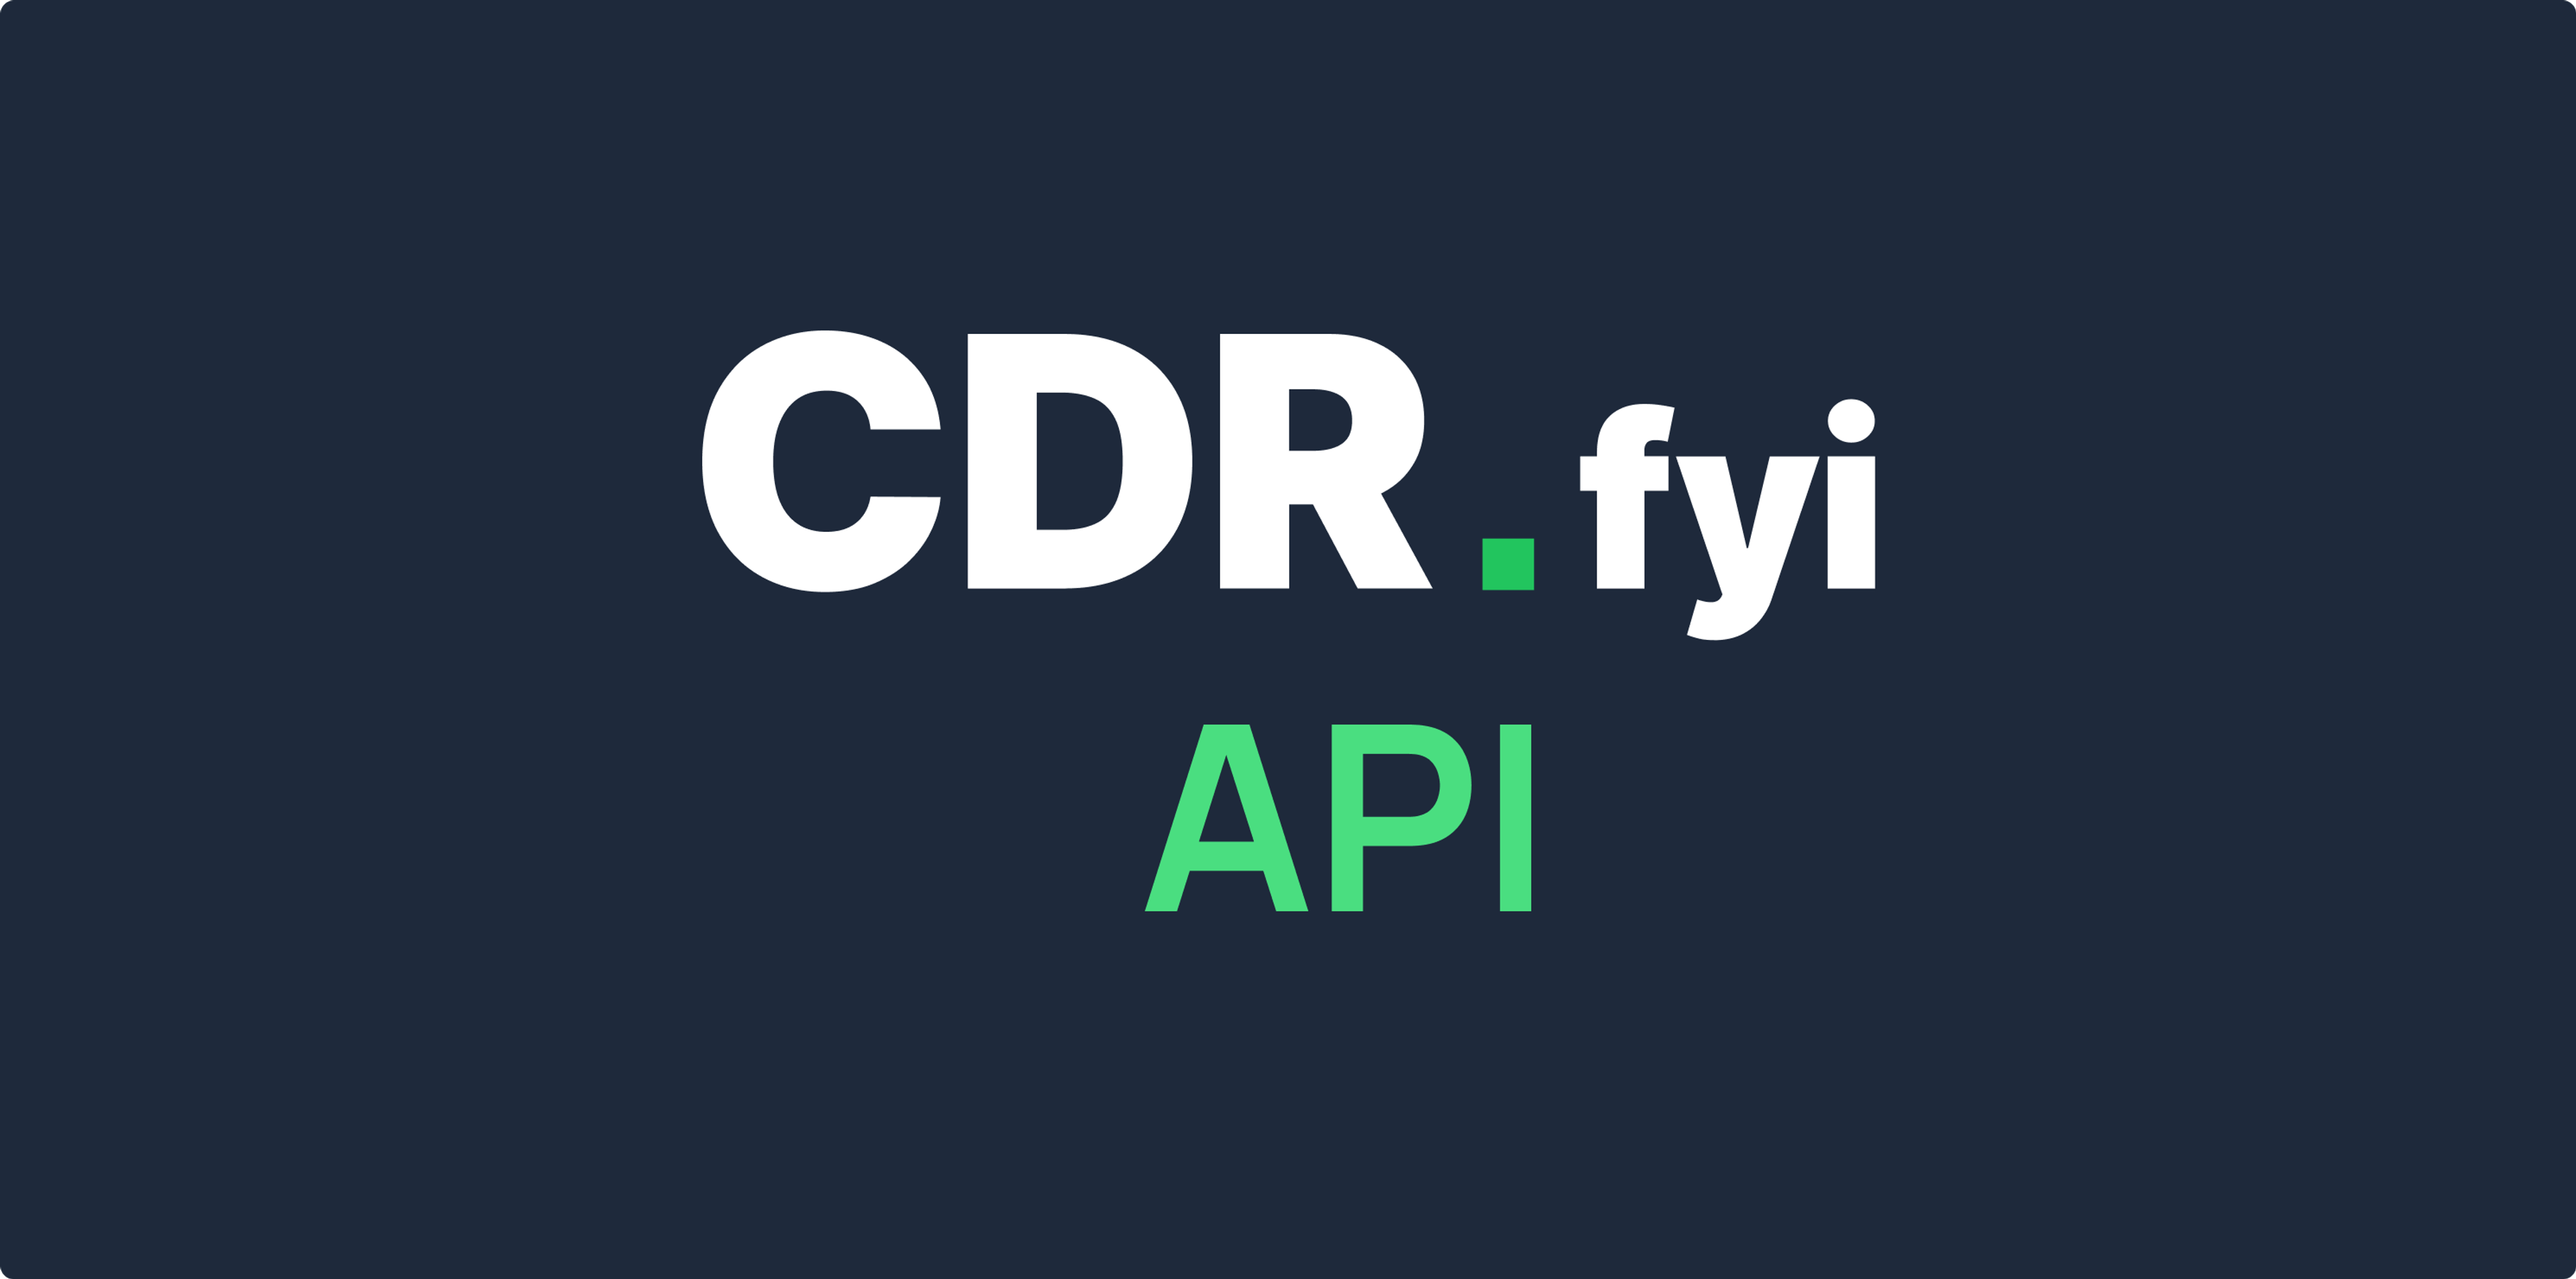 Introducing CDR.fyi API: Access the Universe of Carbon Removal Data blog post image